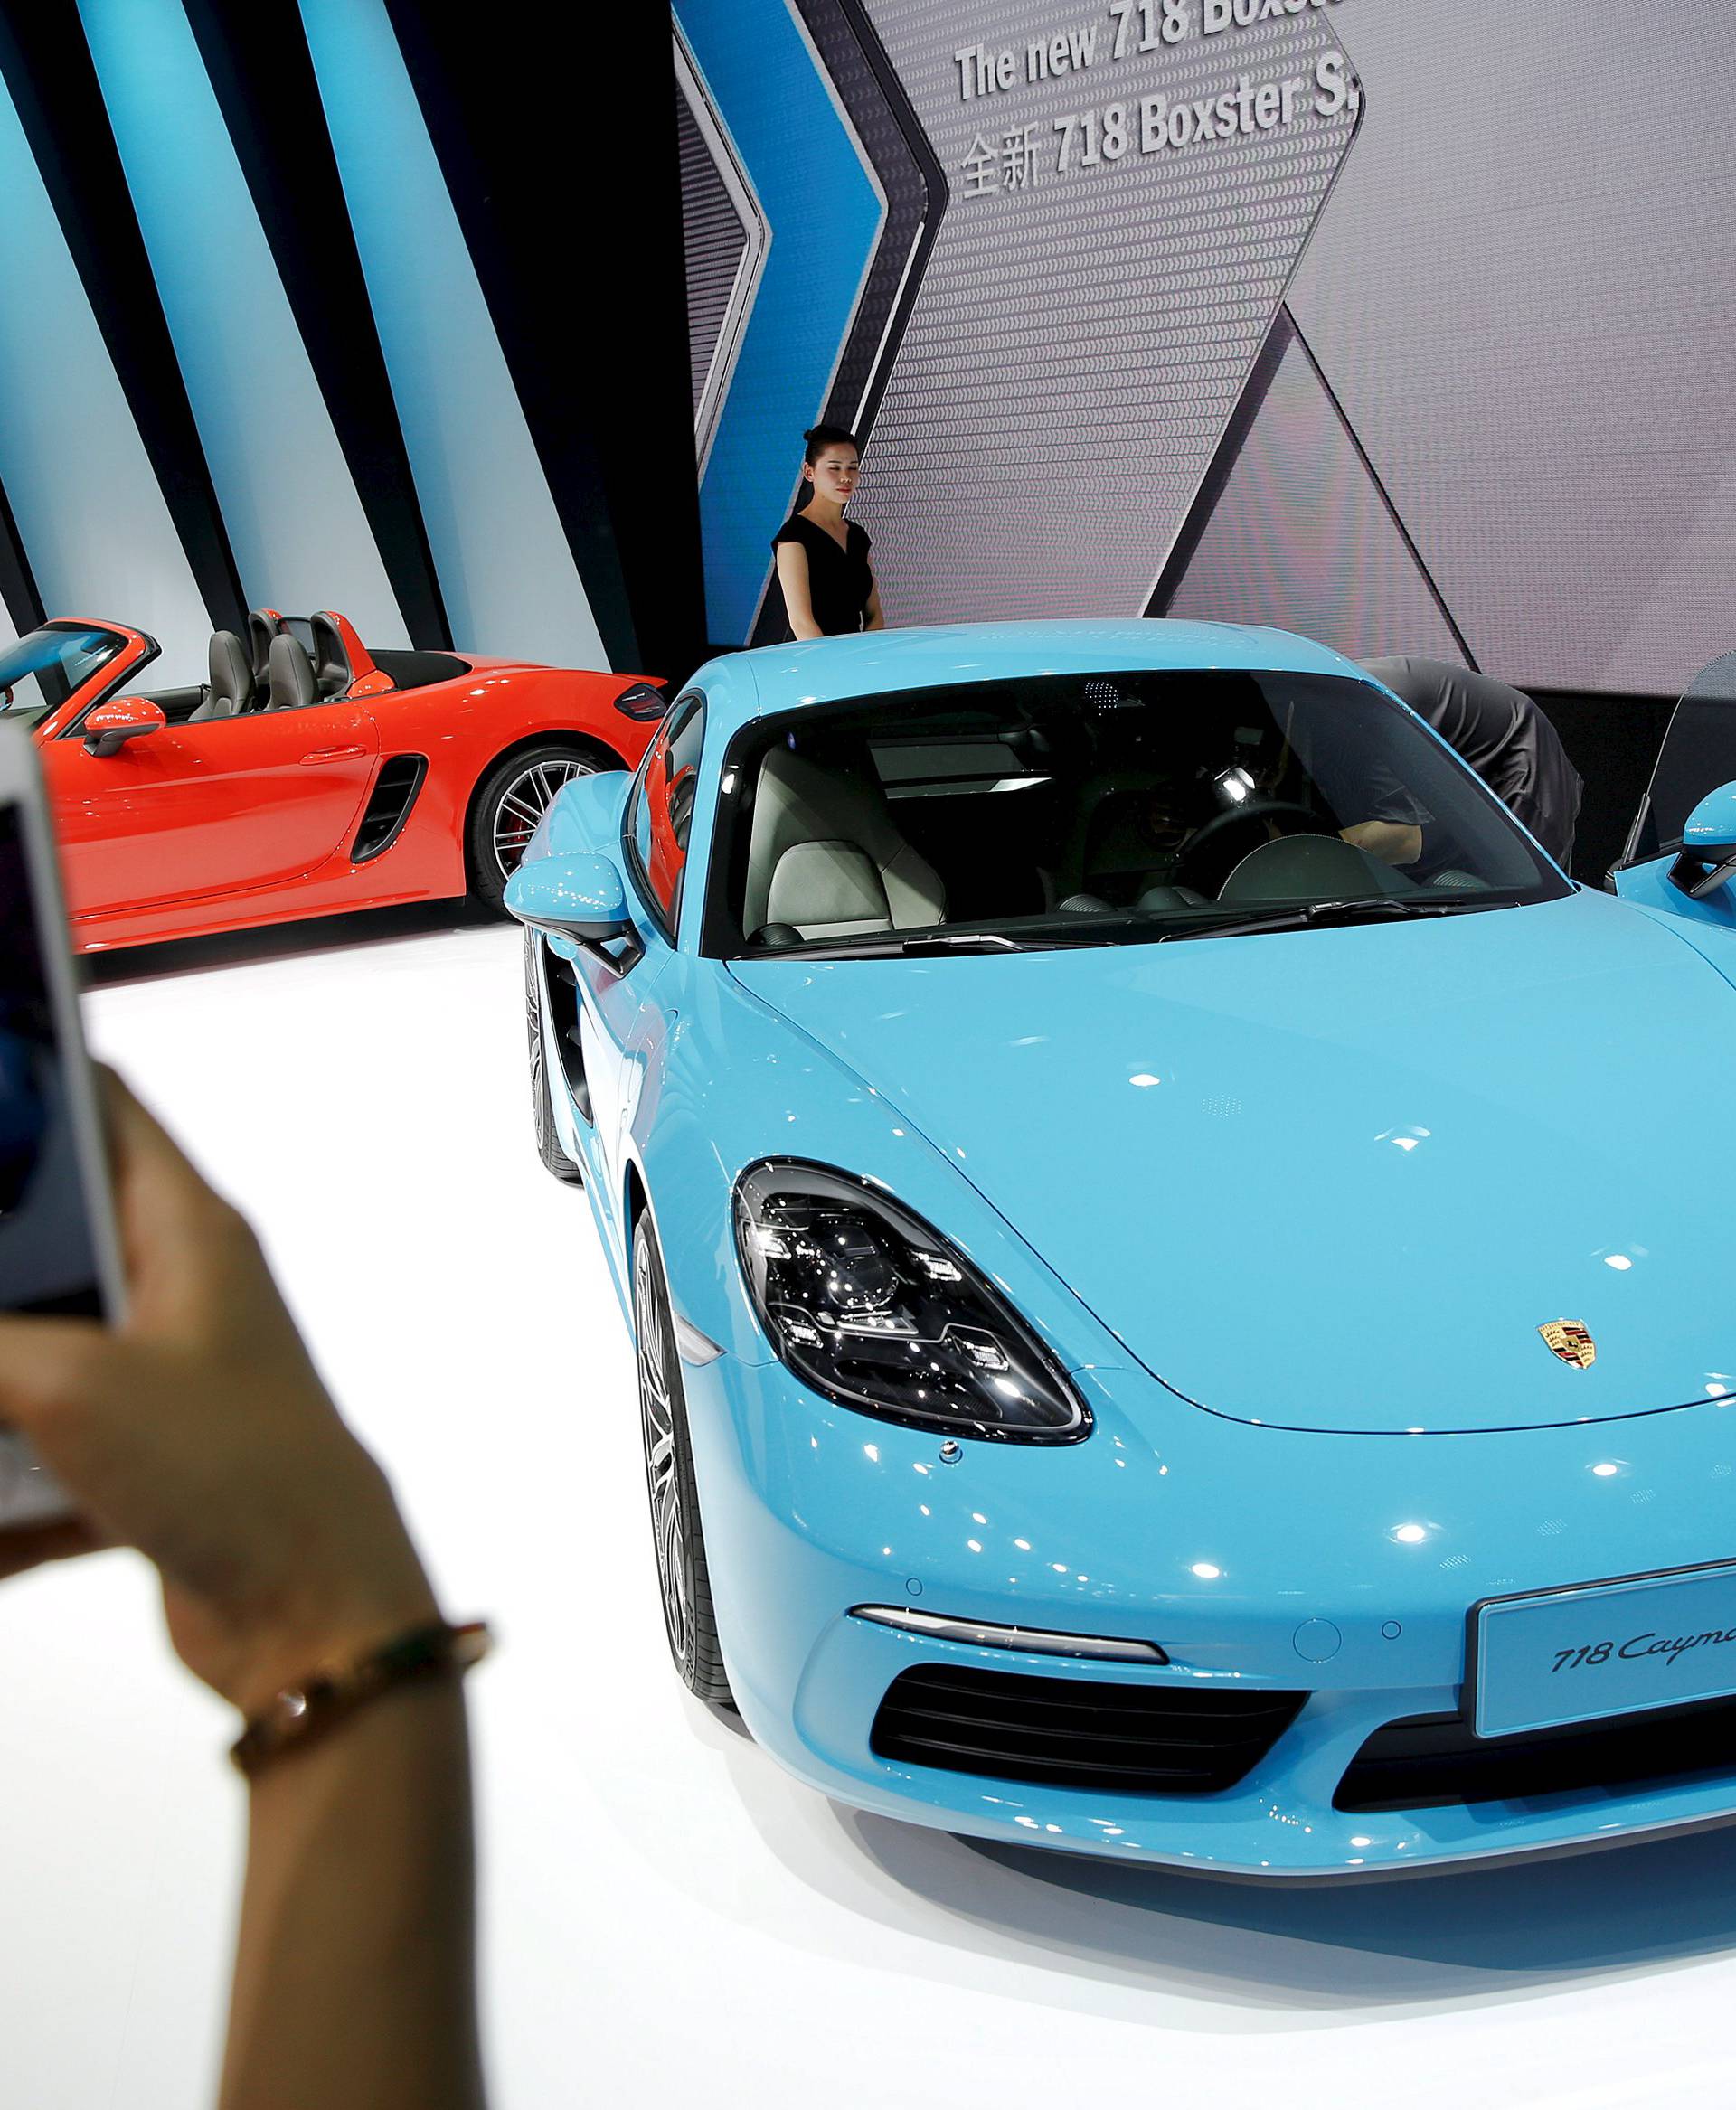 A visitor takes pictures of a new Porsche 718 Cayman S presented during Auto China 2016 auto show in Beijing